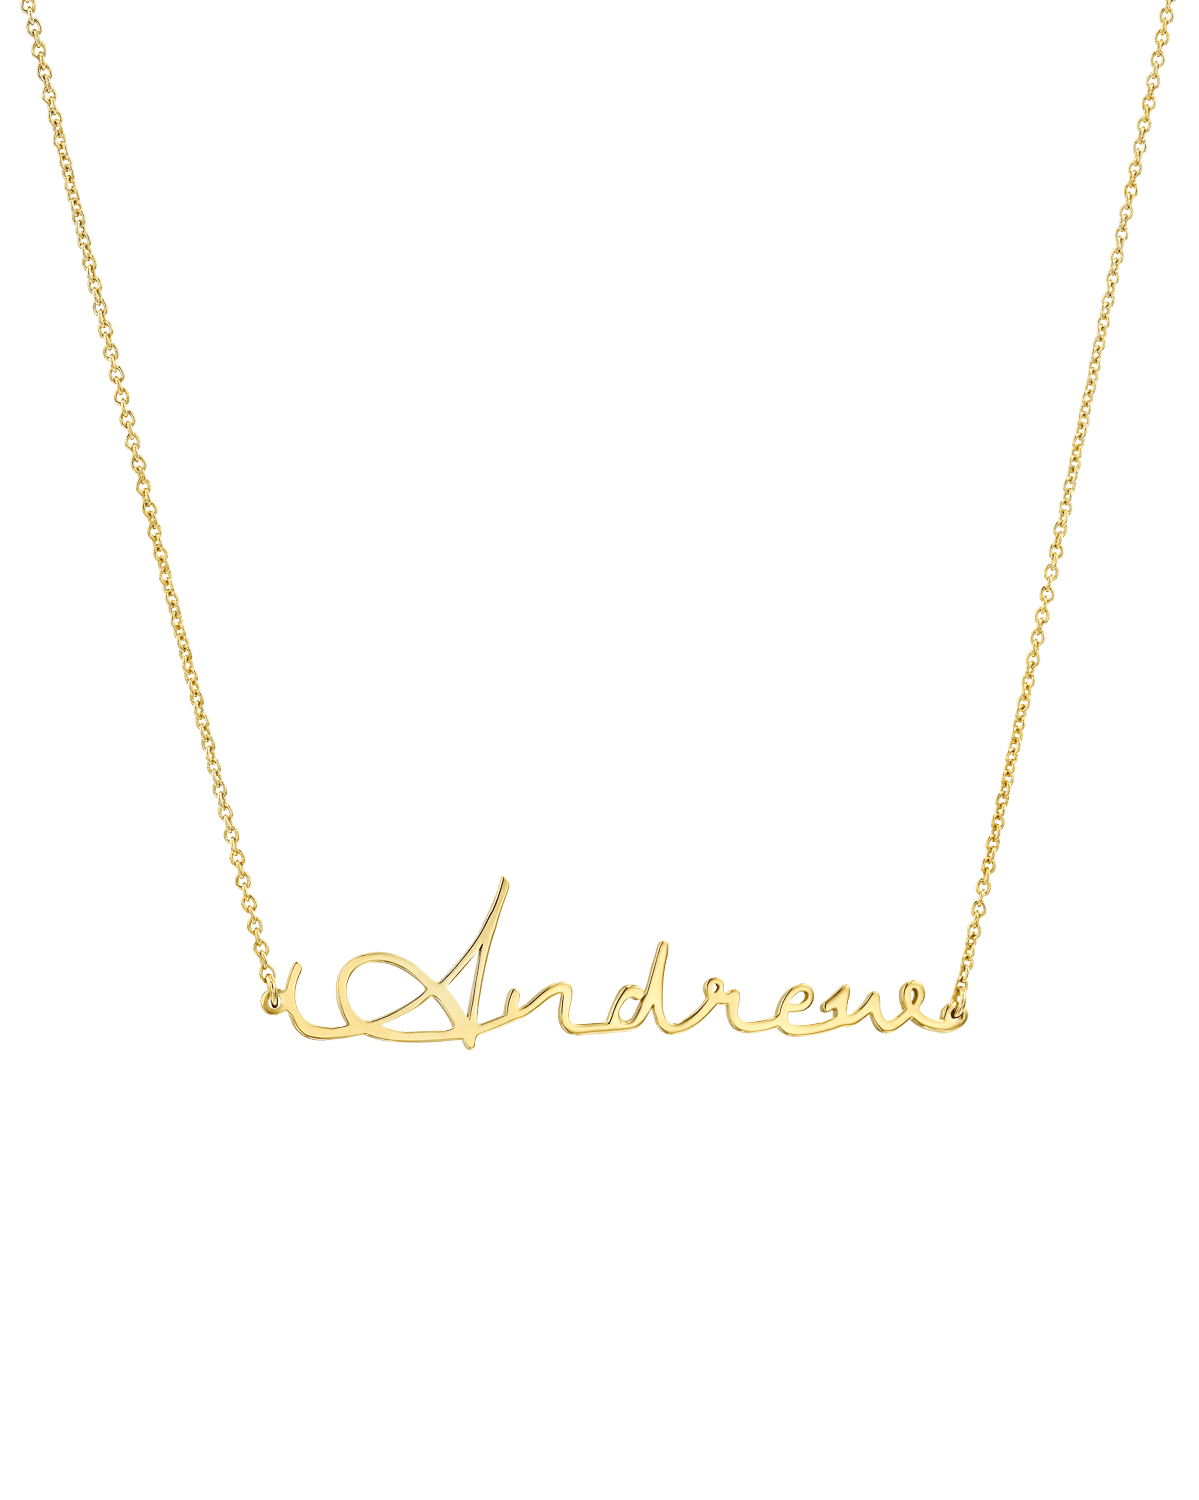 Malibu Name Necklace - 925 Sterling Silver Necklaces magal-dev 